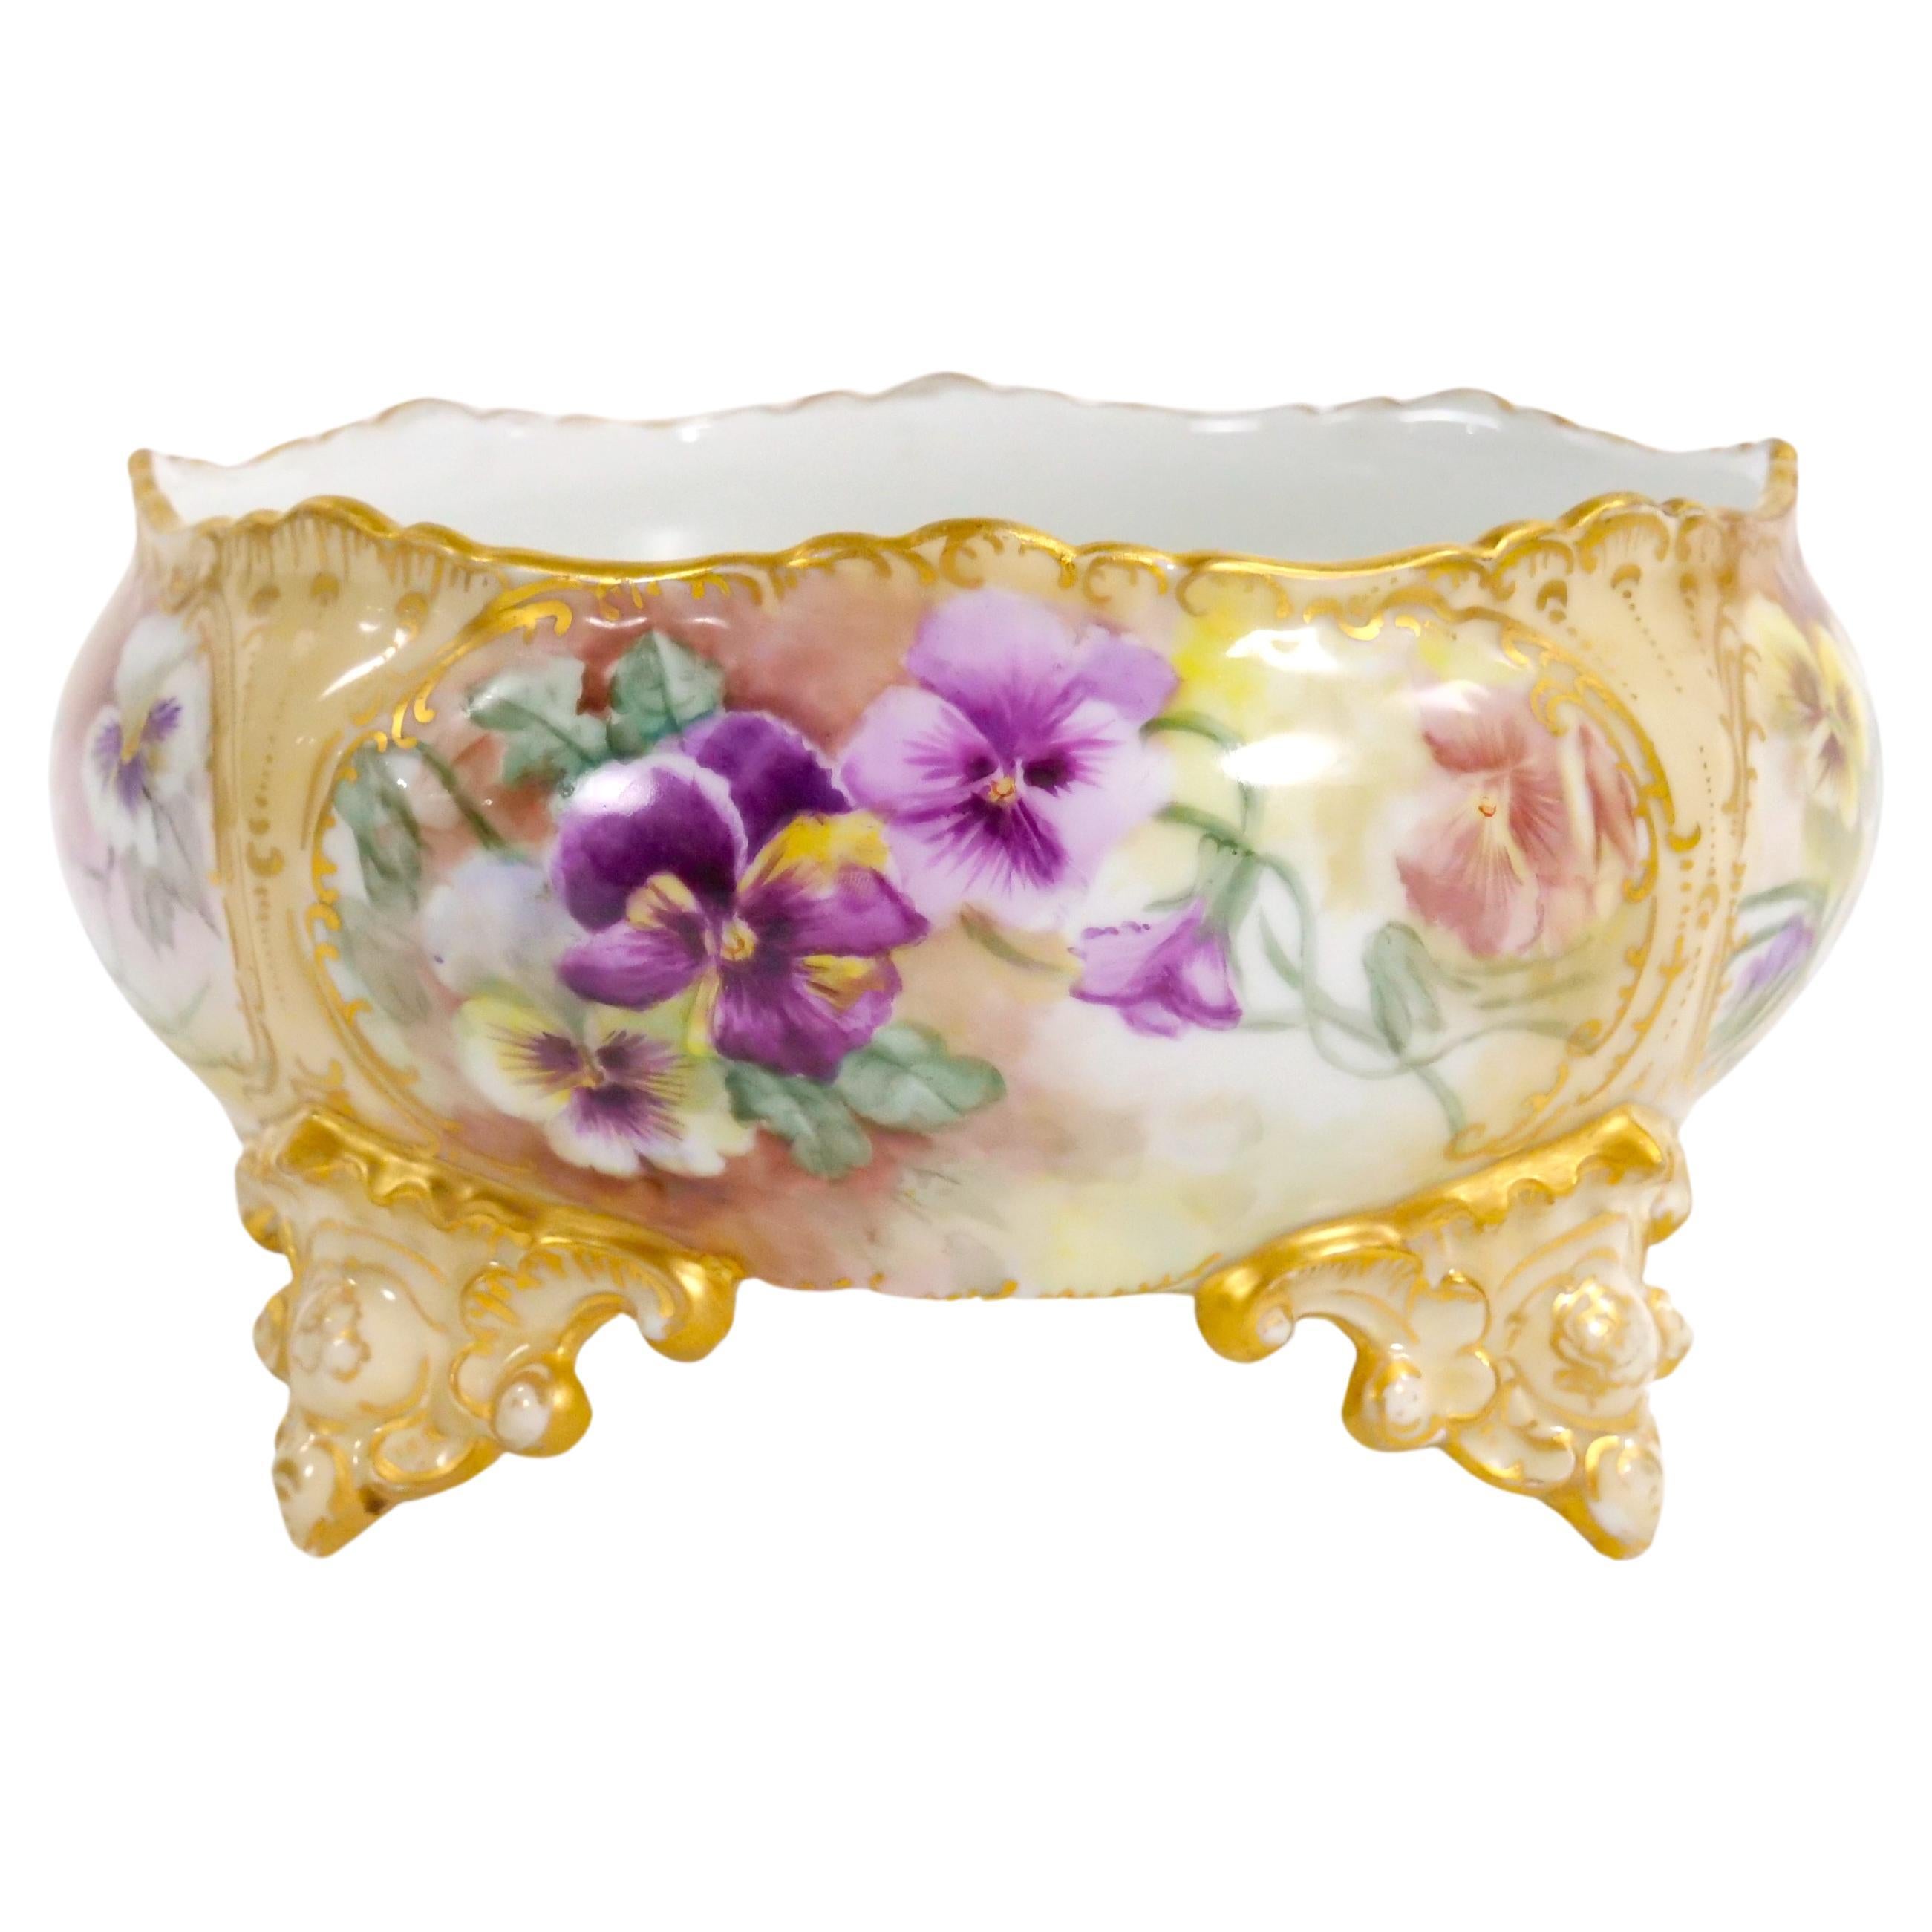 Beautifully Hand Painted / Gilt  French Porcelain Footed Centerpiece Bowl For Sale